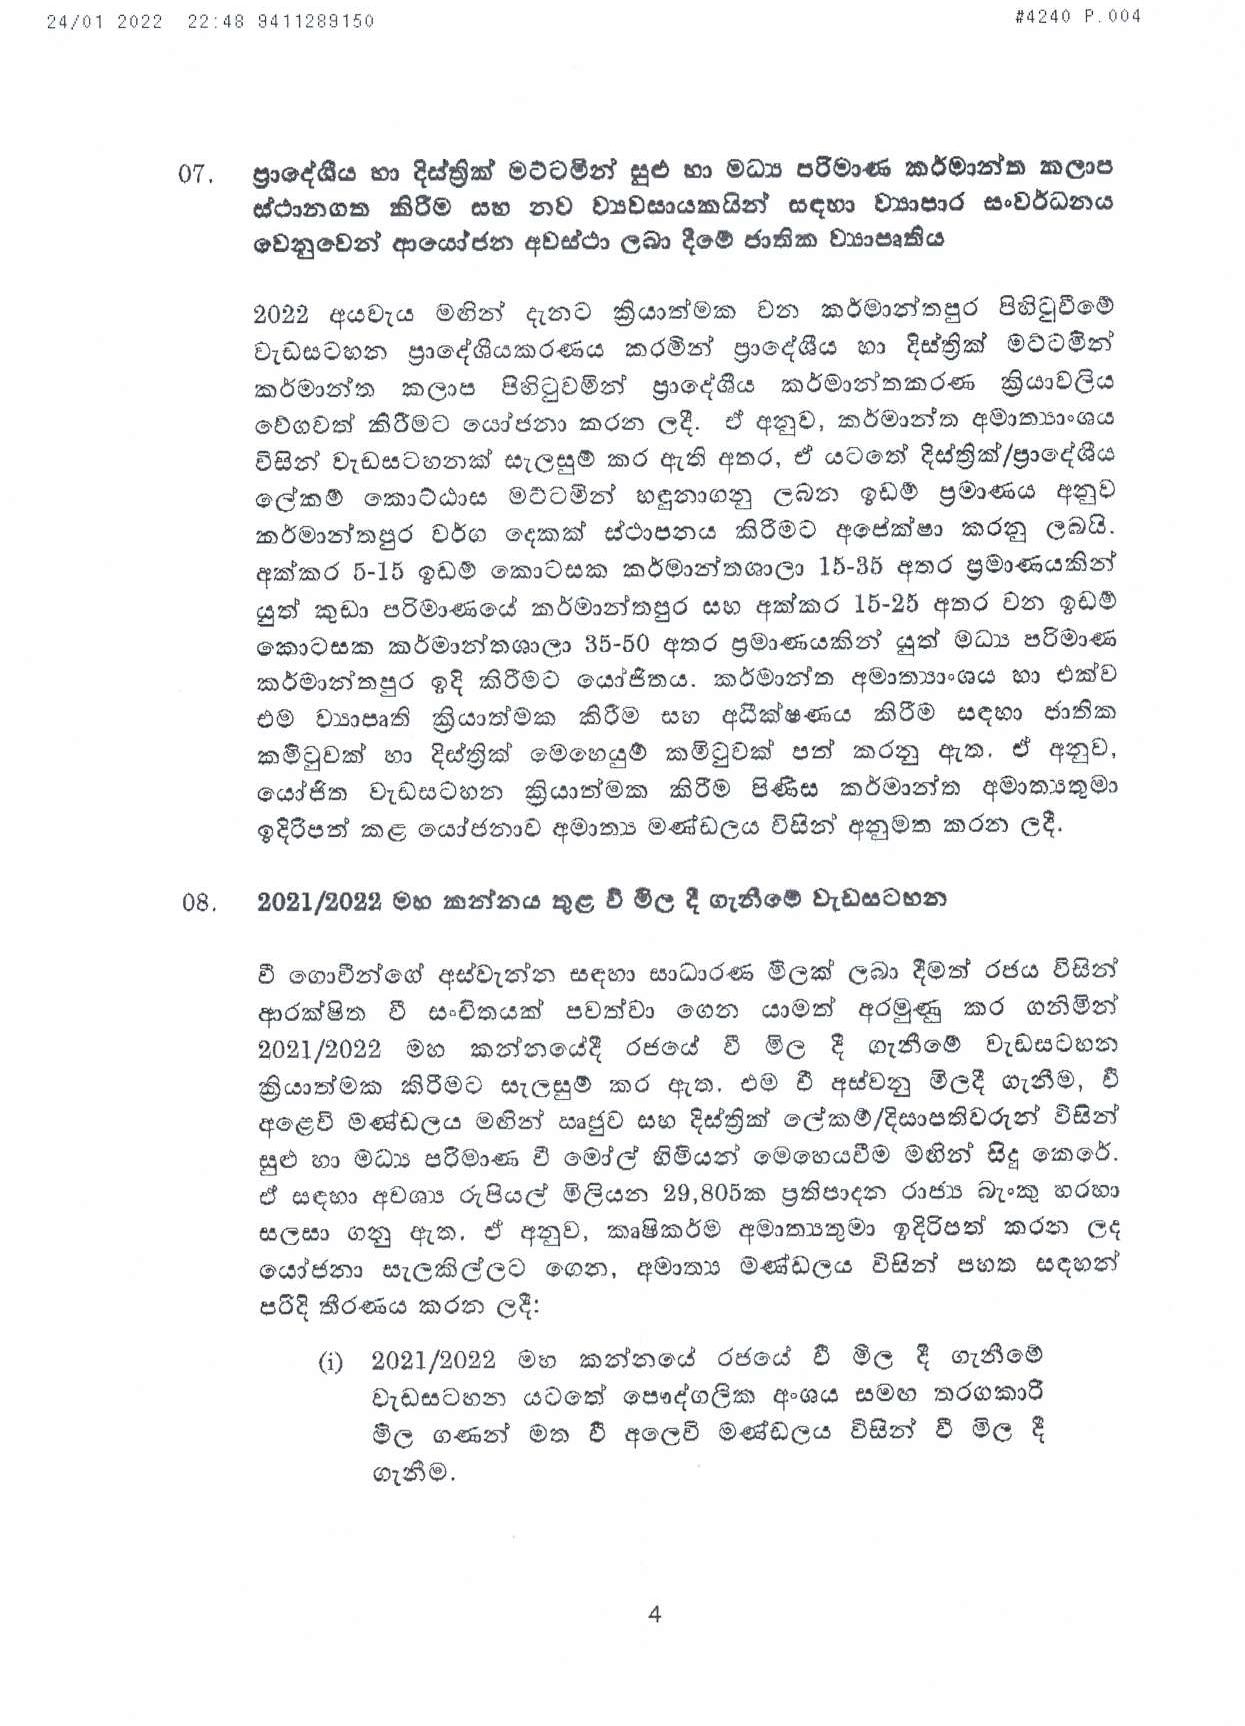 Cabinet Decision on 24.01.2022 page 004